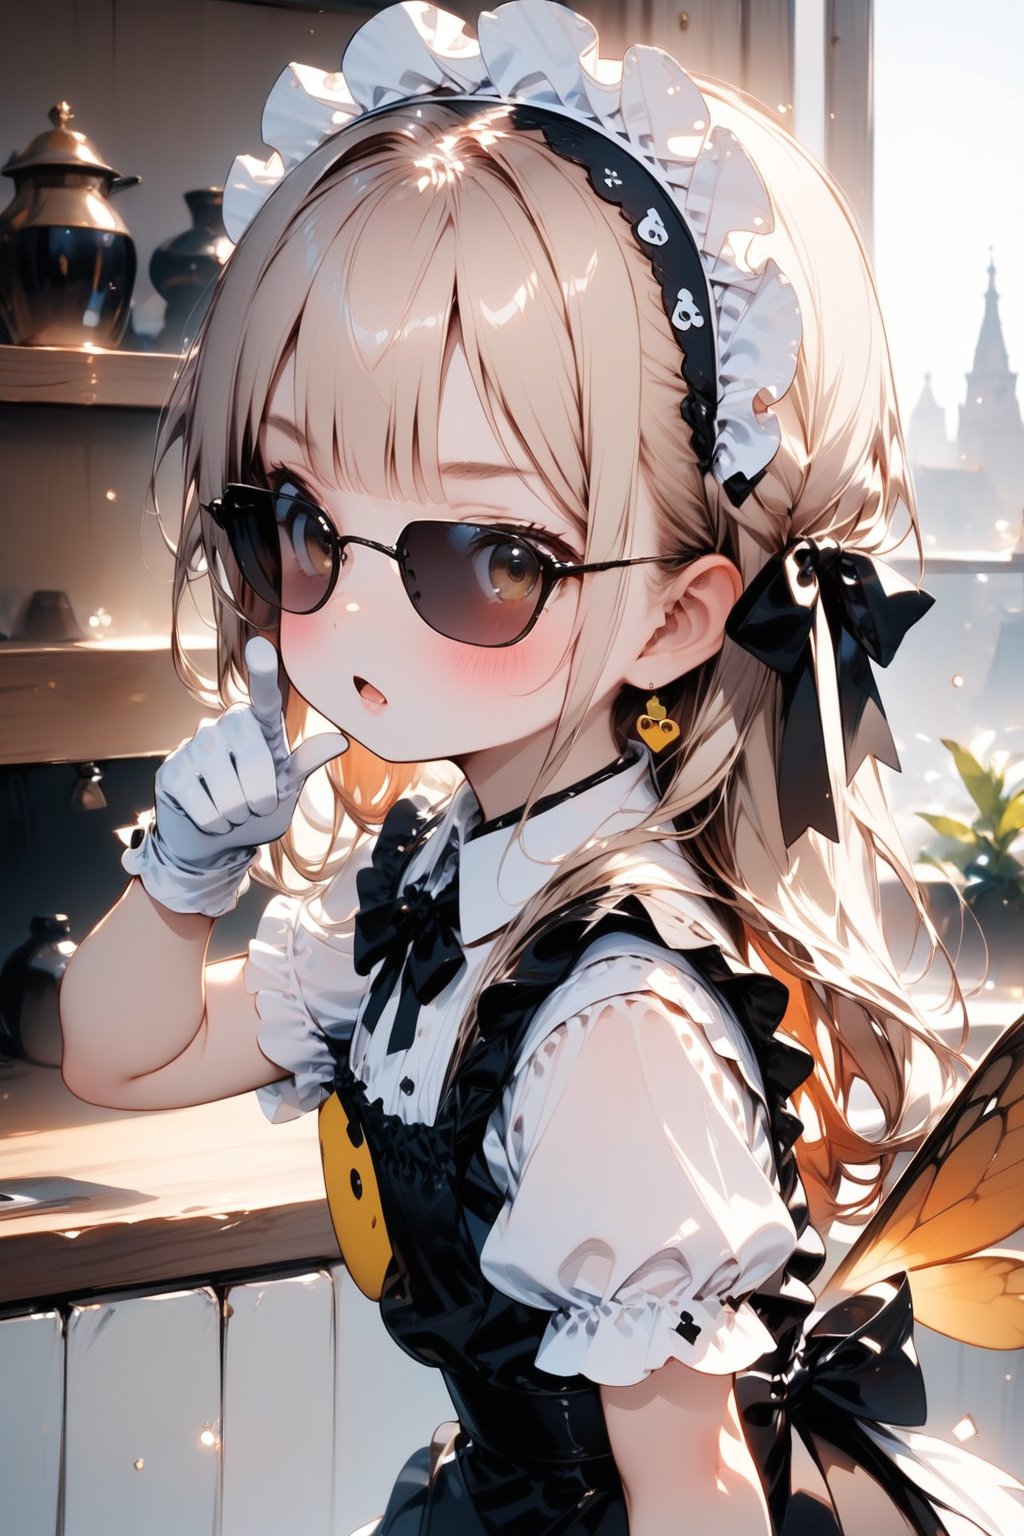 //quality, masterpiece:1.4, detailed:1.4, best quality:1.4,//,1girl,solo,loli,//,blonde hair,(long hair),blunt bangs,//,bee_wings,(sunglasses),spades_symbols,bow,maid headband,white maid_costume with spades_symbols,white gloves,//,blush,mouth_open,serious,//,walking,finger_up,looking_at_viewer,//,indoors,Deformed,agtsg,sunglasses,Details,Detailed Masterpiece,cowboy_shot,from_side,face focus,